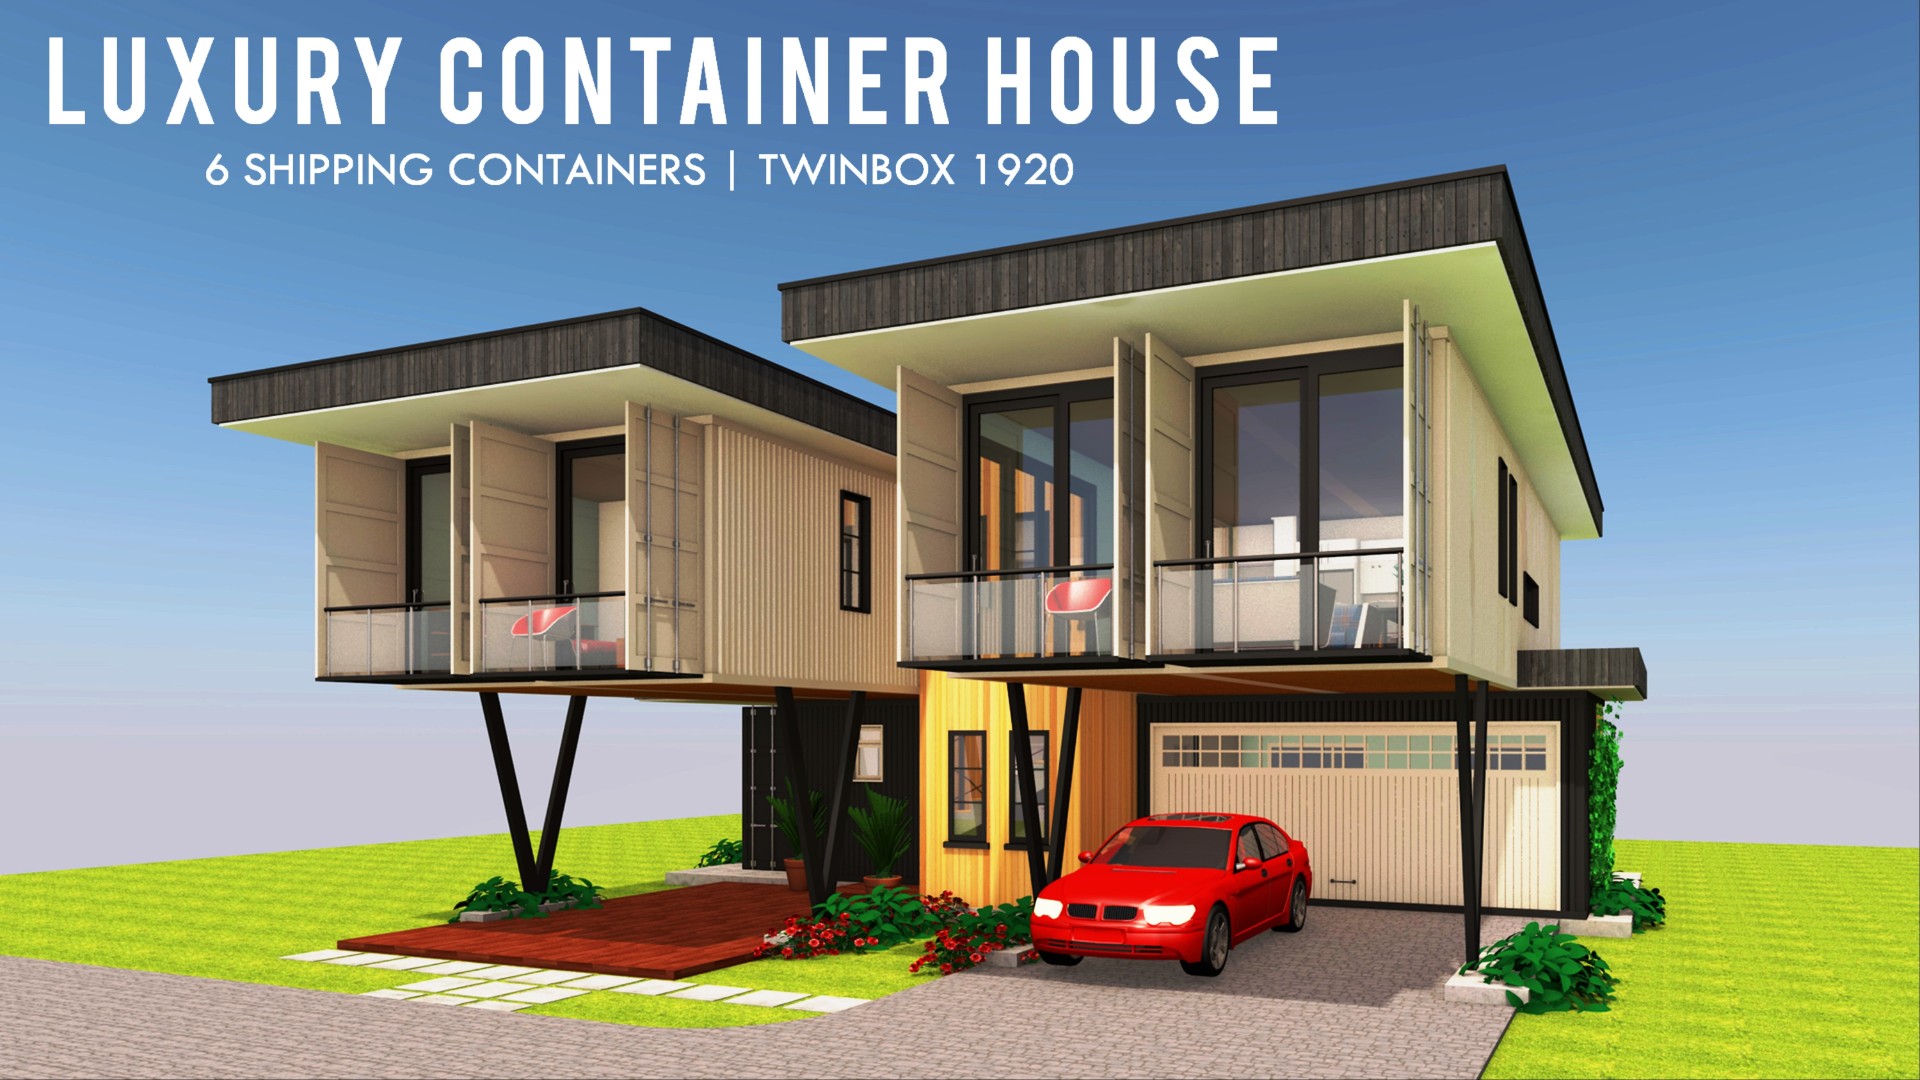 Luxury Shipping Container 5 Bedroom House Design + Floor Plans | TWINBOX 1920